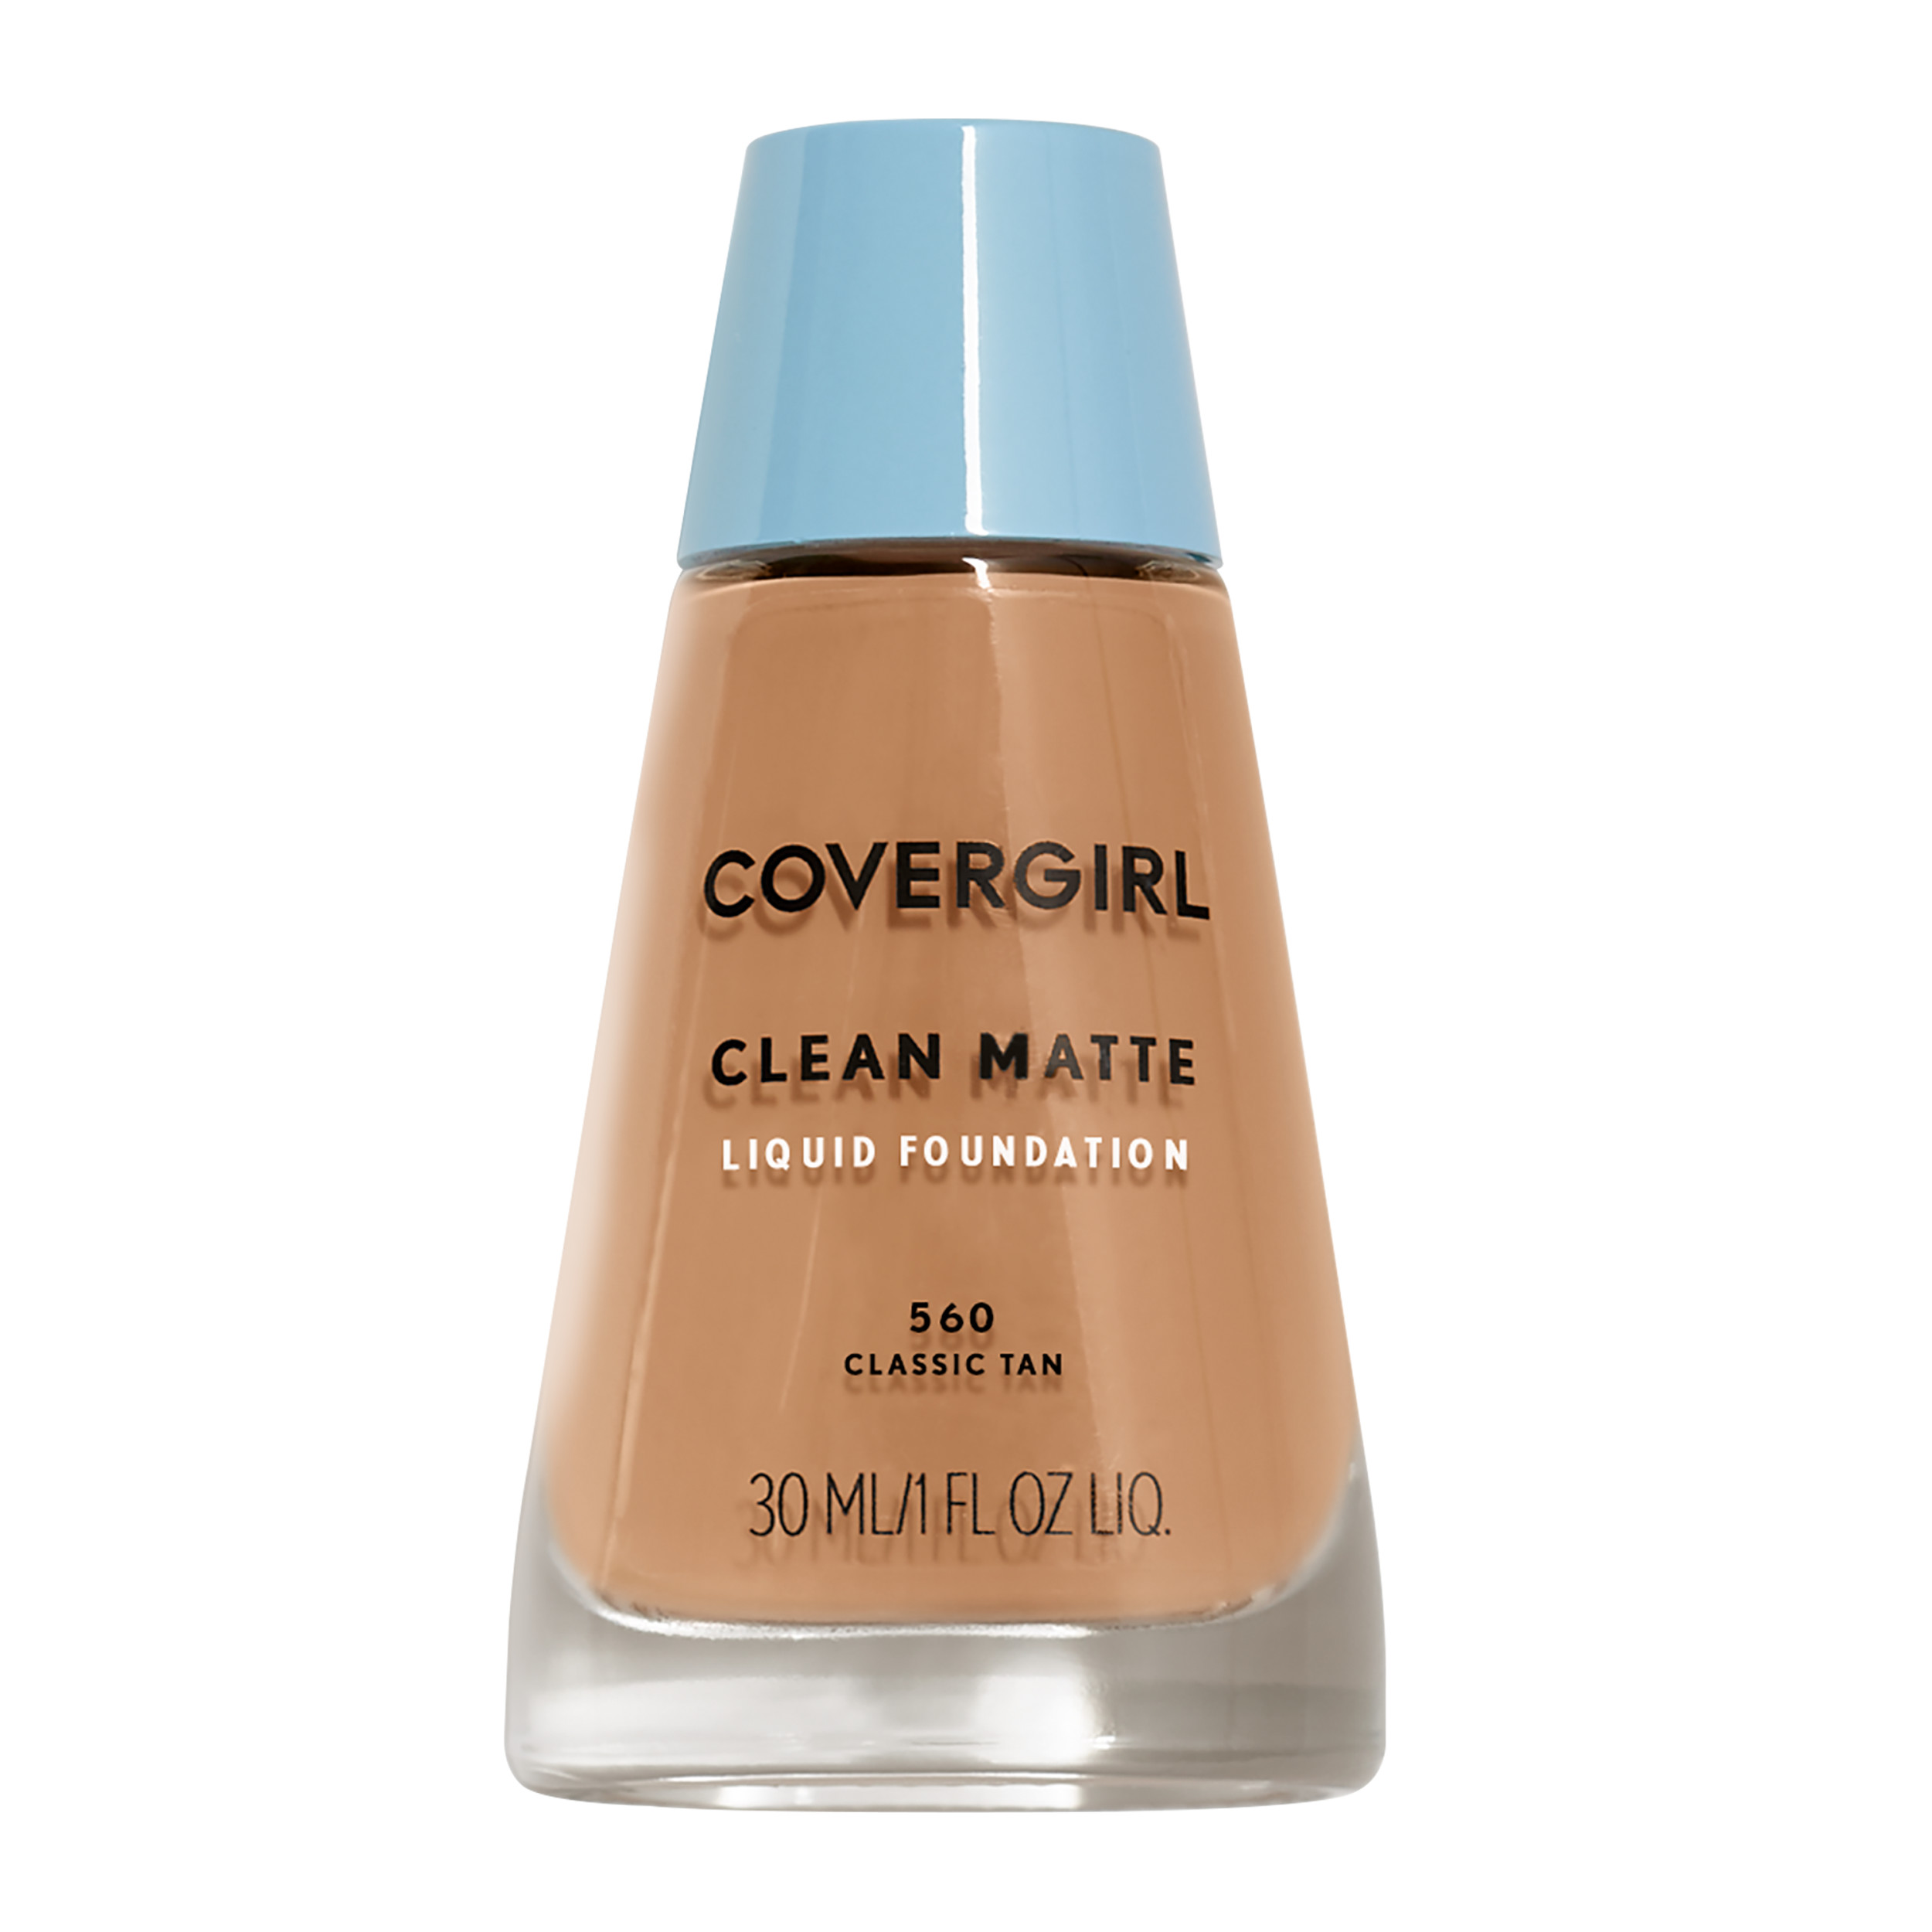 COVERGIRL Clean Matte Liquid Foundation, 560 Classic Tan, 1 oz, Liquid Foundation, Matte Foundation, Lightweight Foundation, Moisturizing Foundation, Water Based Foundation - image 1 of 8